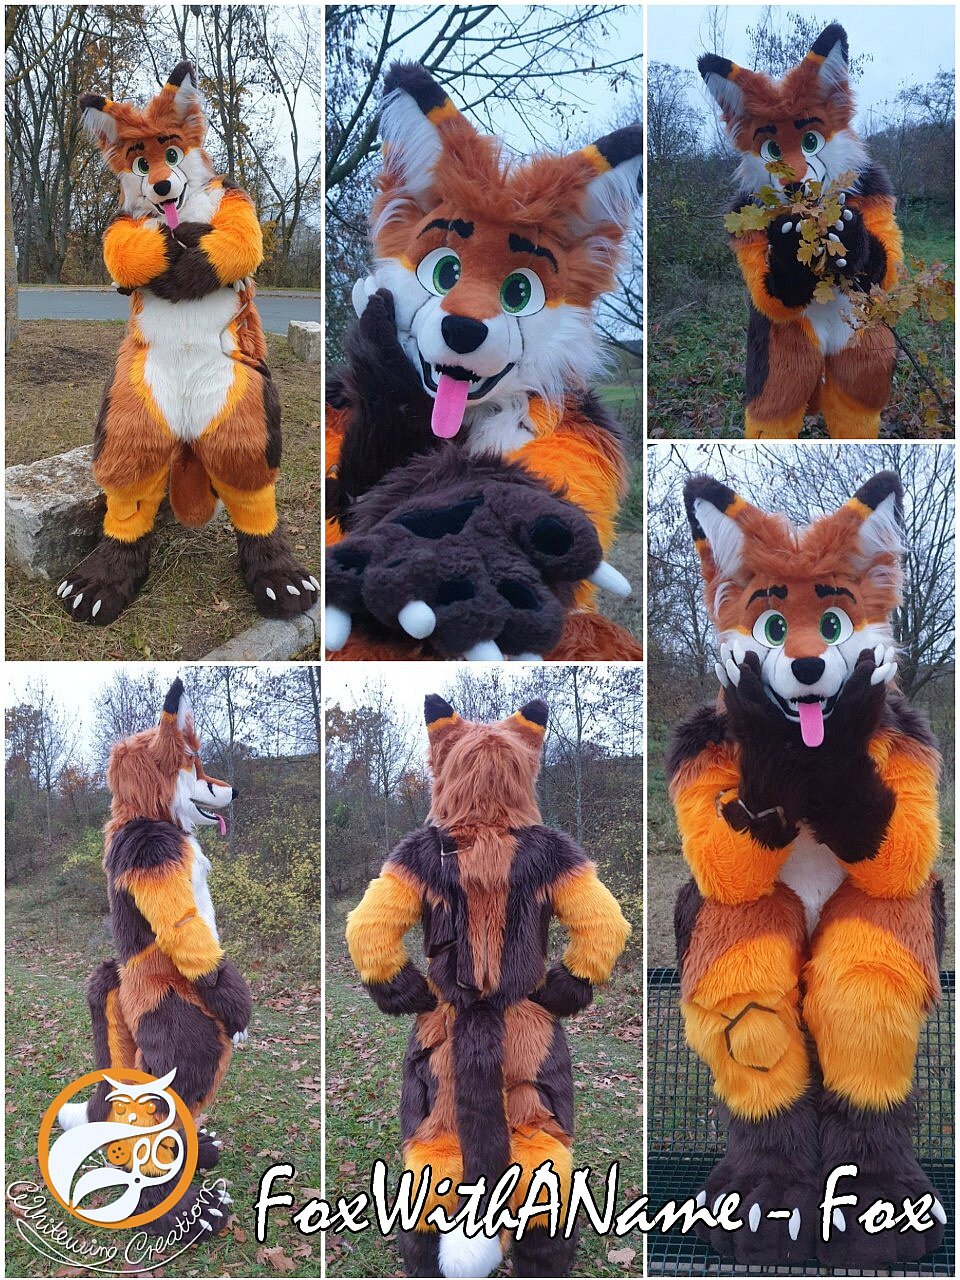 FoxWithAName - Full Fursuit made by WhitewingCreations - Fursuits made in Germany